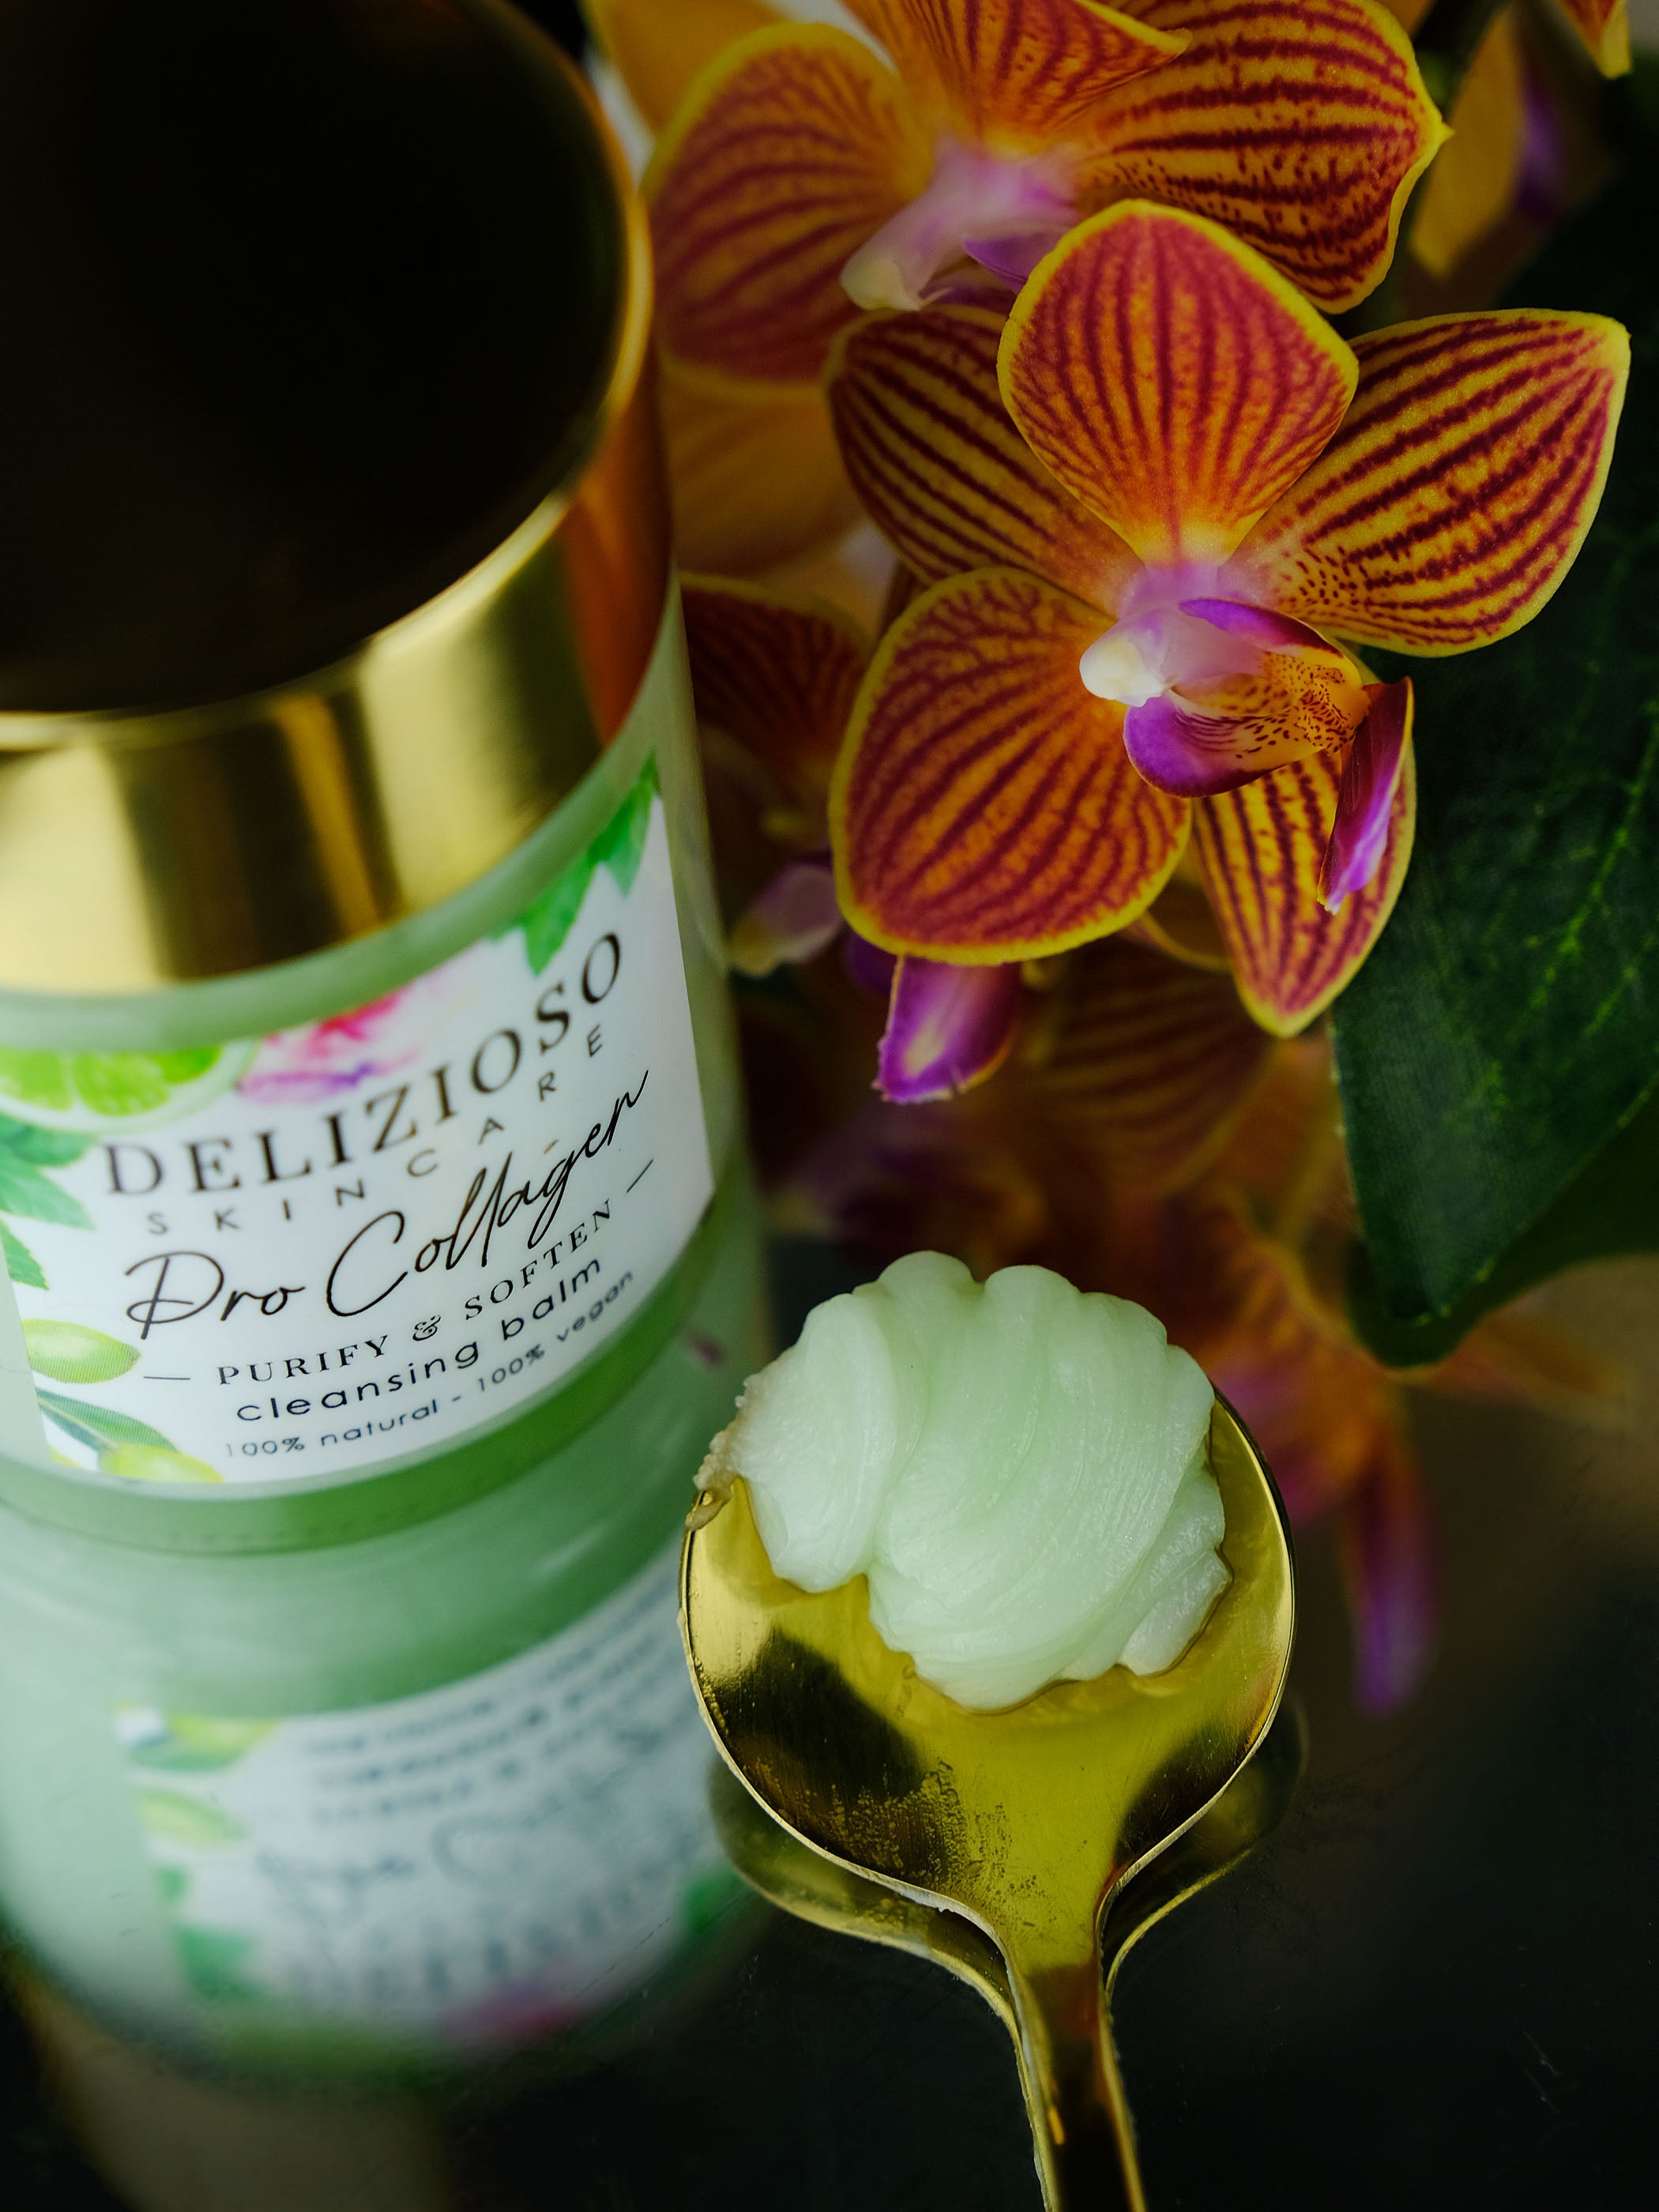 Pro-Collagen Purify & Soften Cleansing Balm